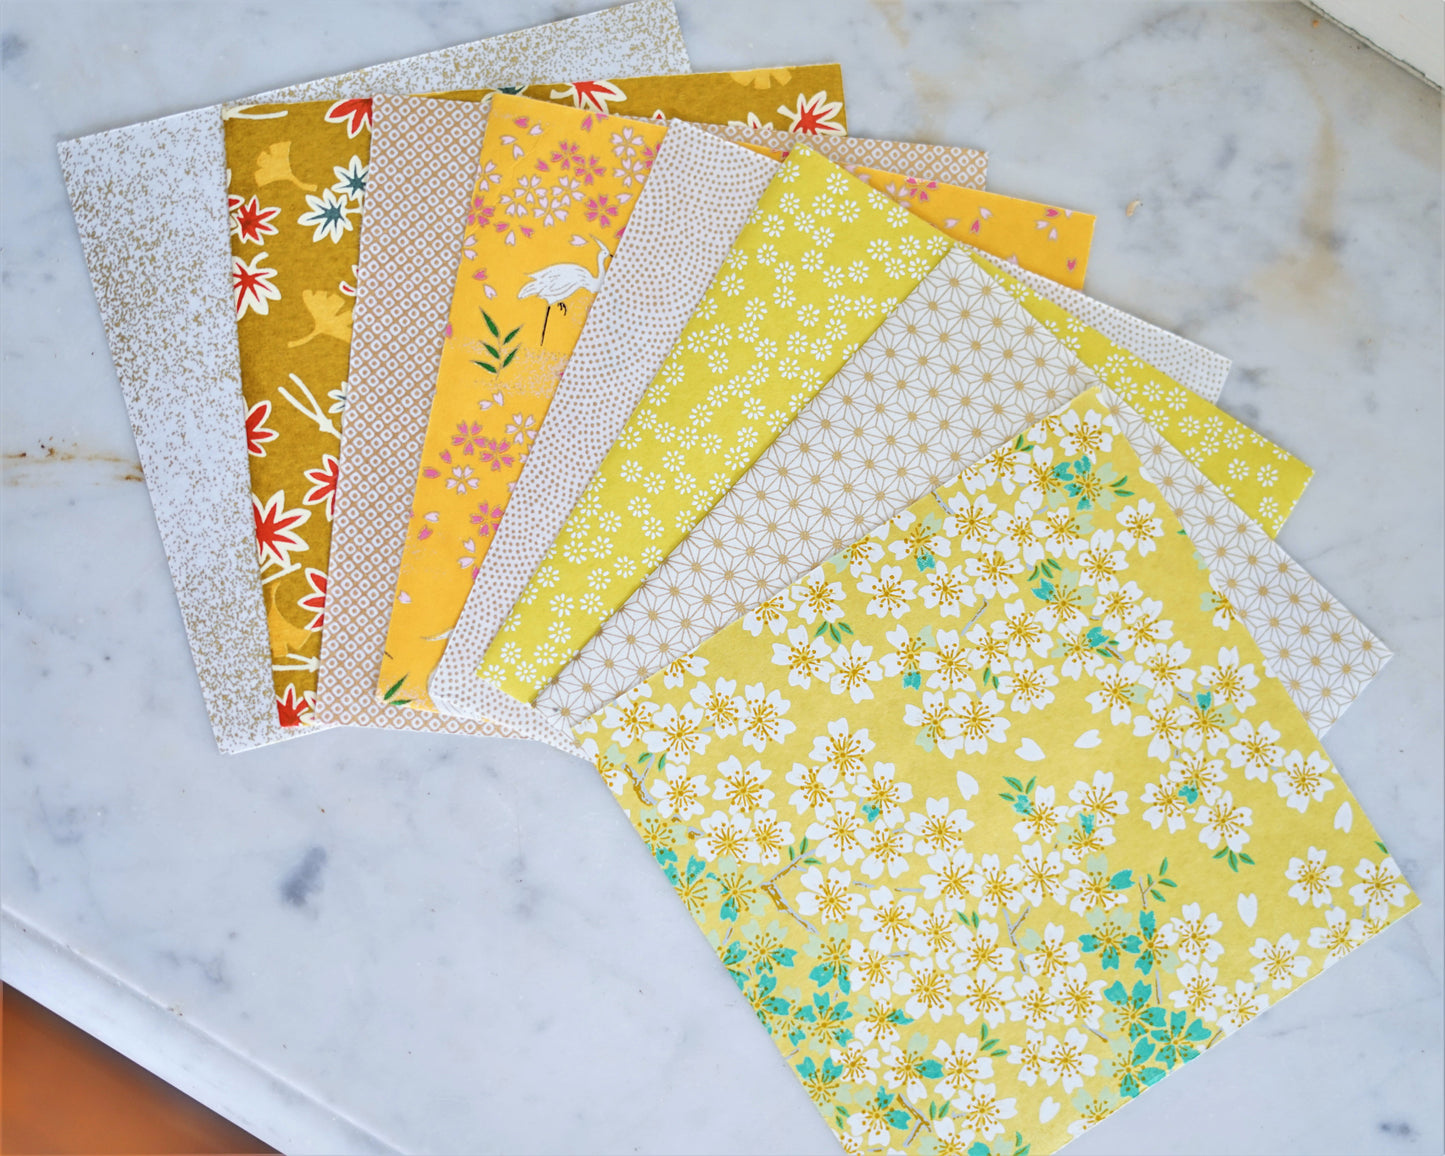 Kit of 16 Japanese origami papers - "Mimosa" - Yellow, mustard, white, gold